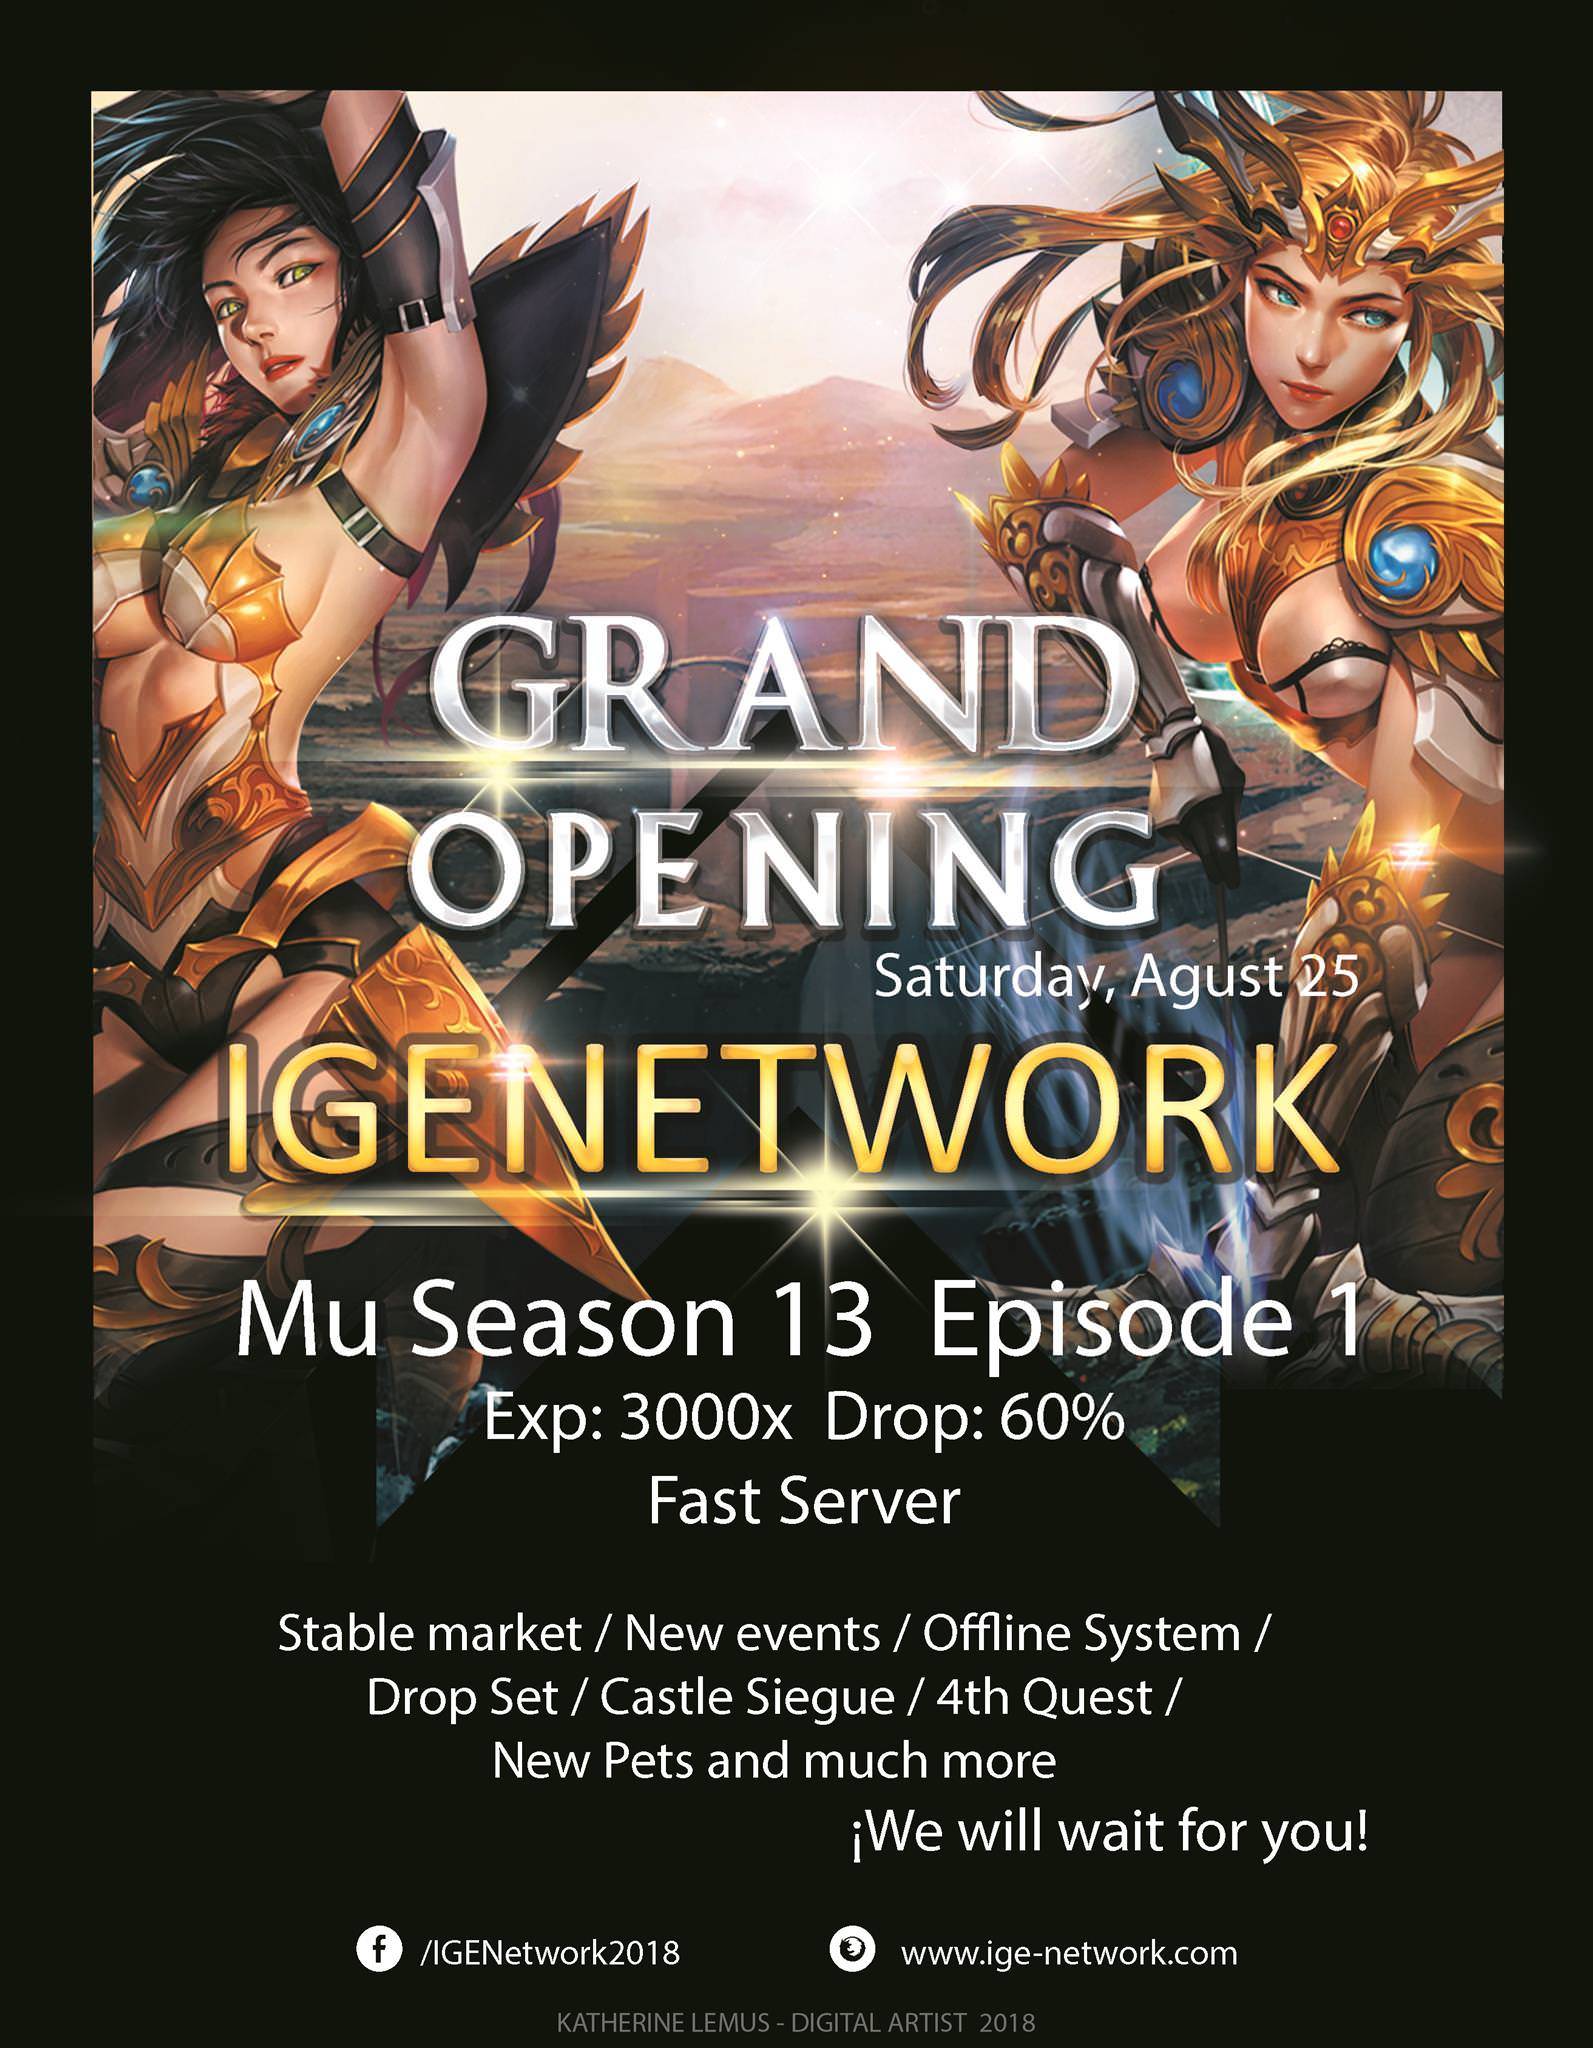 Cai4Nx9 - IGE Network Season XIII Server Fast [ Exp3000x ; Drop:60%] Grand Opening 25-08-2018 - RaGEZONE Forums